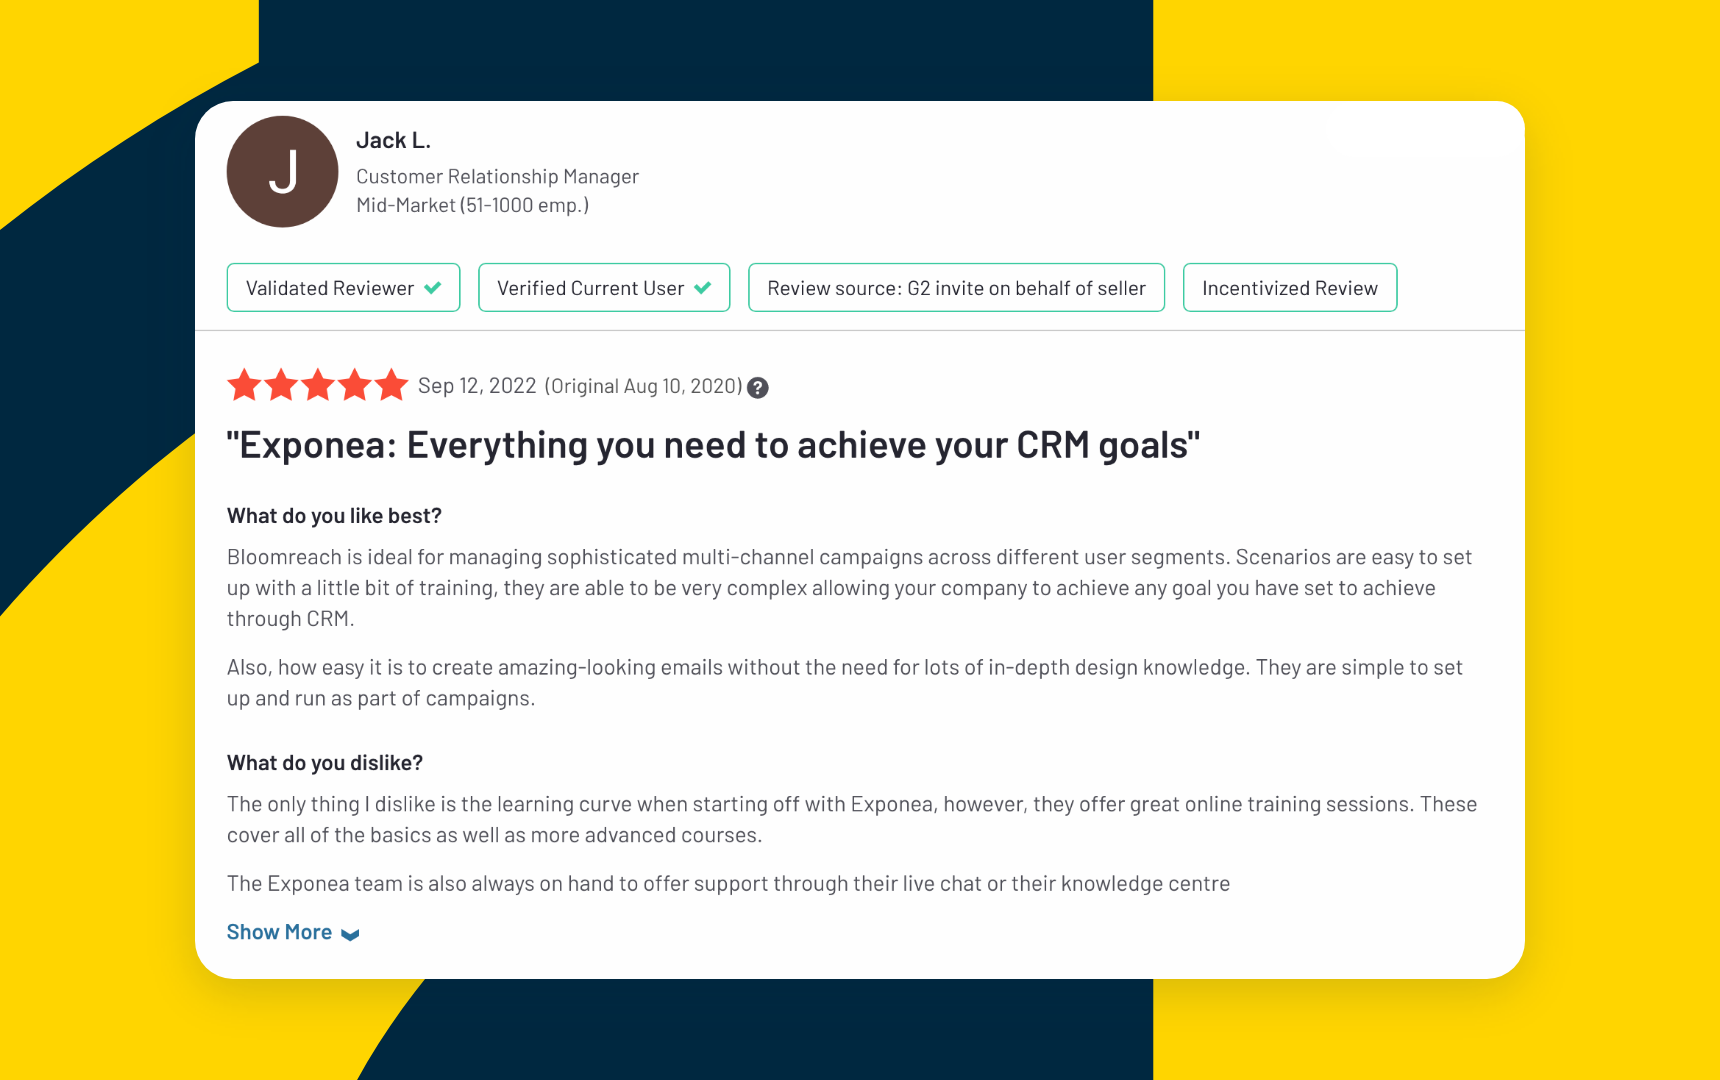 A review highlighting that Bloomreach is ideal for managing sophisticated multi-channel campaigns across different user segments.